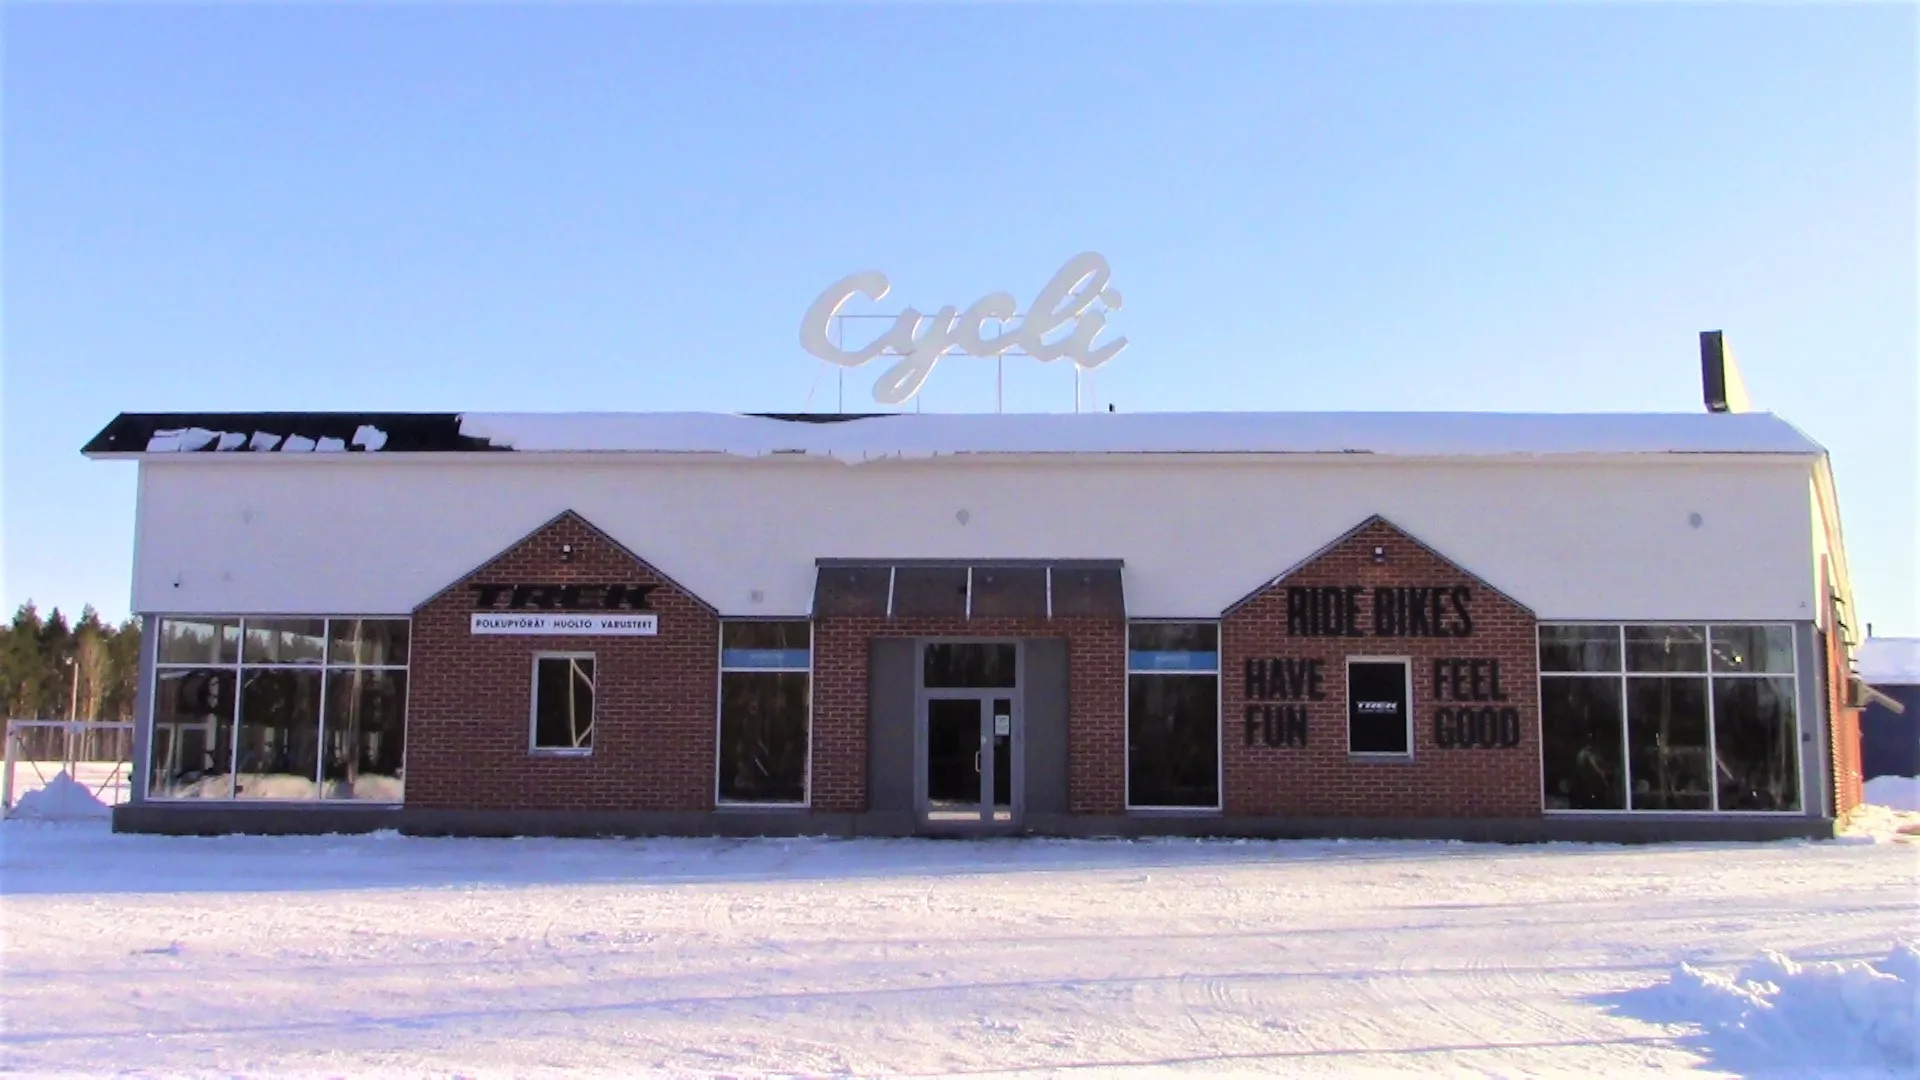 Photo showing: Cycli cycling service and specialty store at Tiiliruukki district in Pori, Finland.